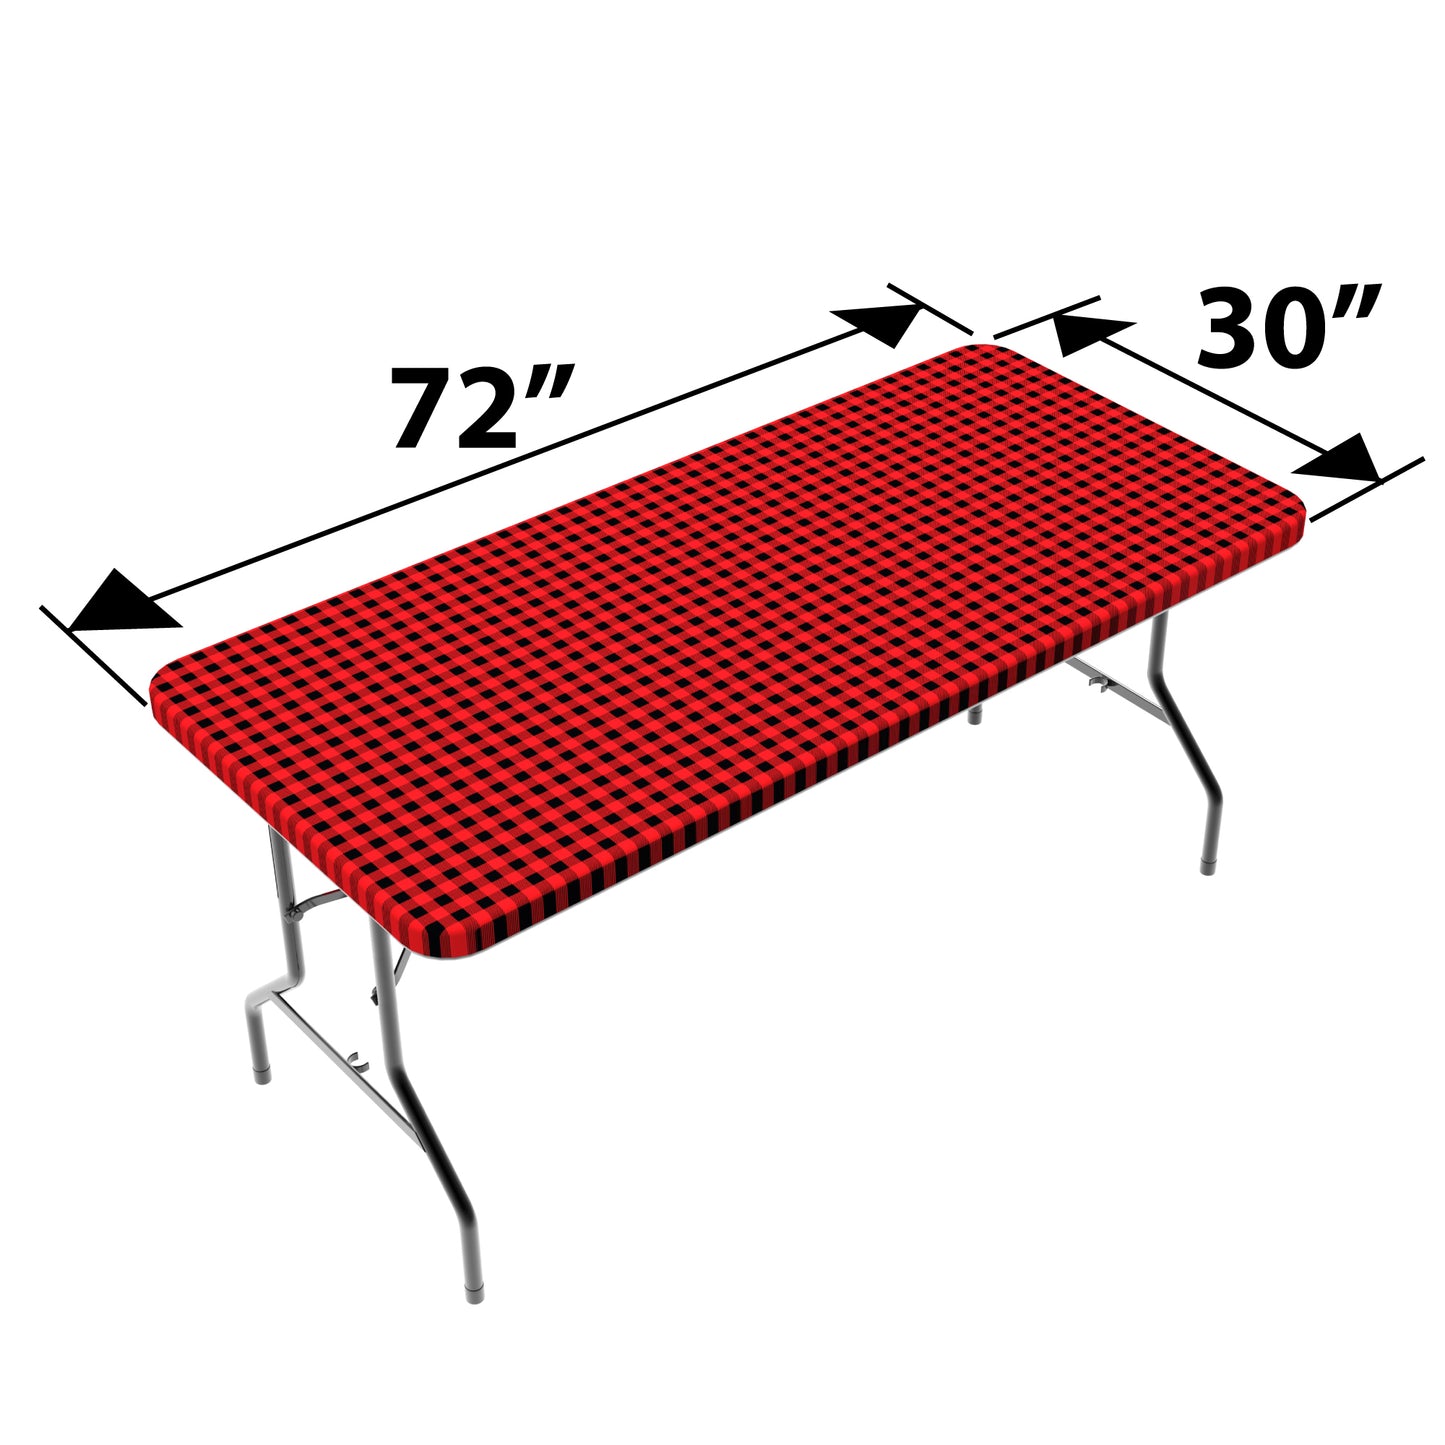 TableCloth PLUS 72" Checkerboard Black and Red Fitted PEVA Vinyl Tablecloth for 6' Folding Tables displayed adorning a folding table